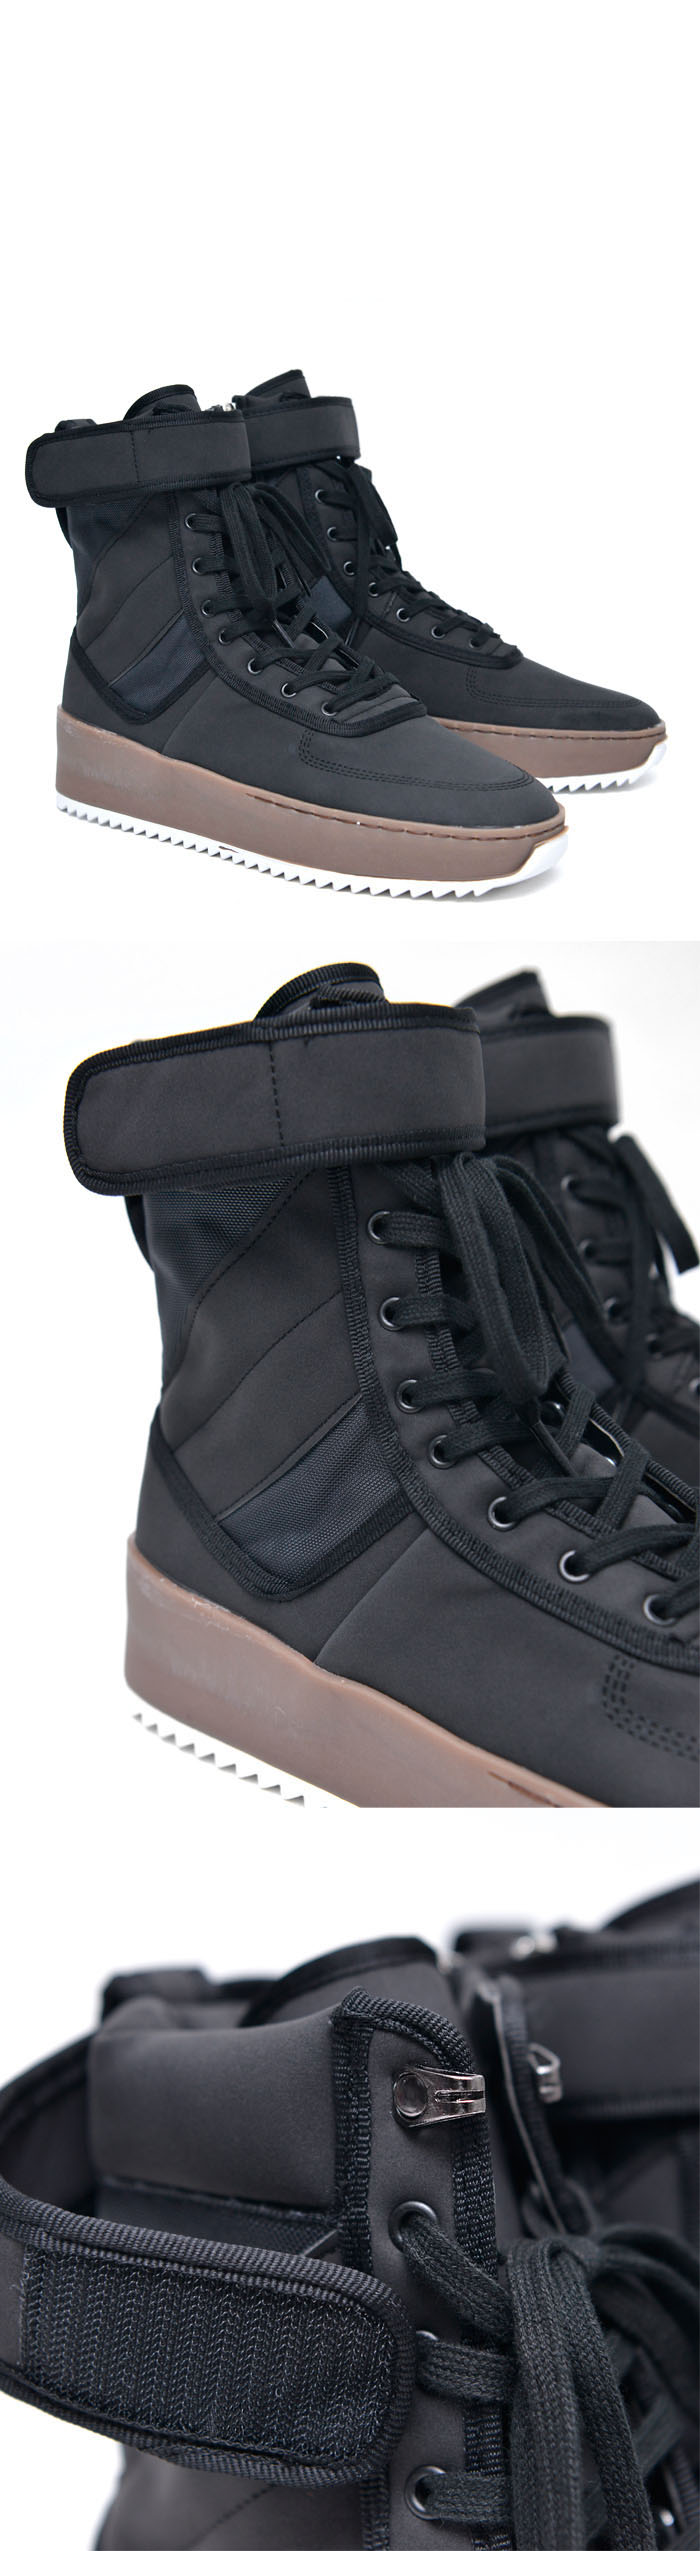 Shoes :: Sneakers :: Military Leather High Top-Shoes 593 - GUYLOOK Men ...